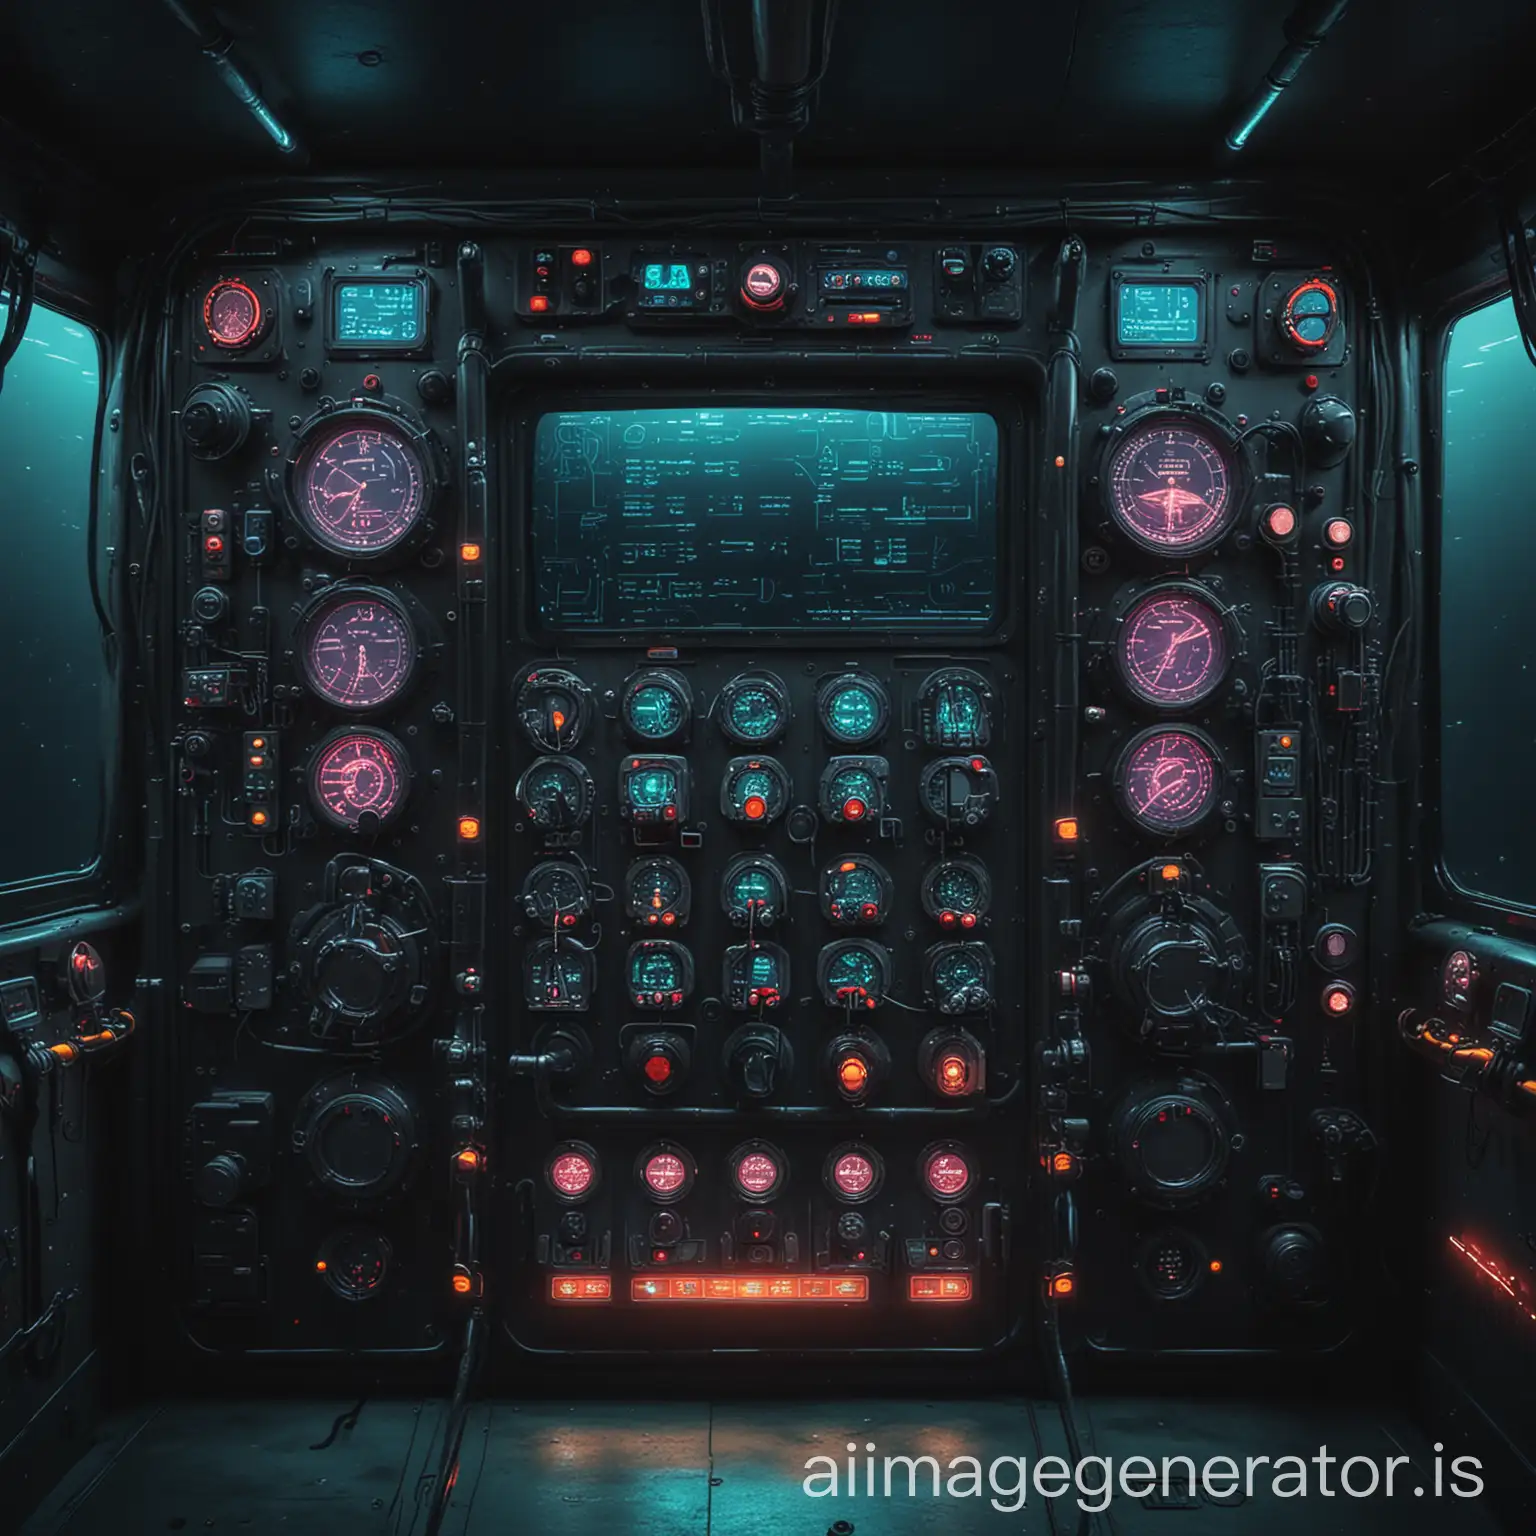 control panel of navigation of a futuristic minimalist style submarine with neon colors